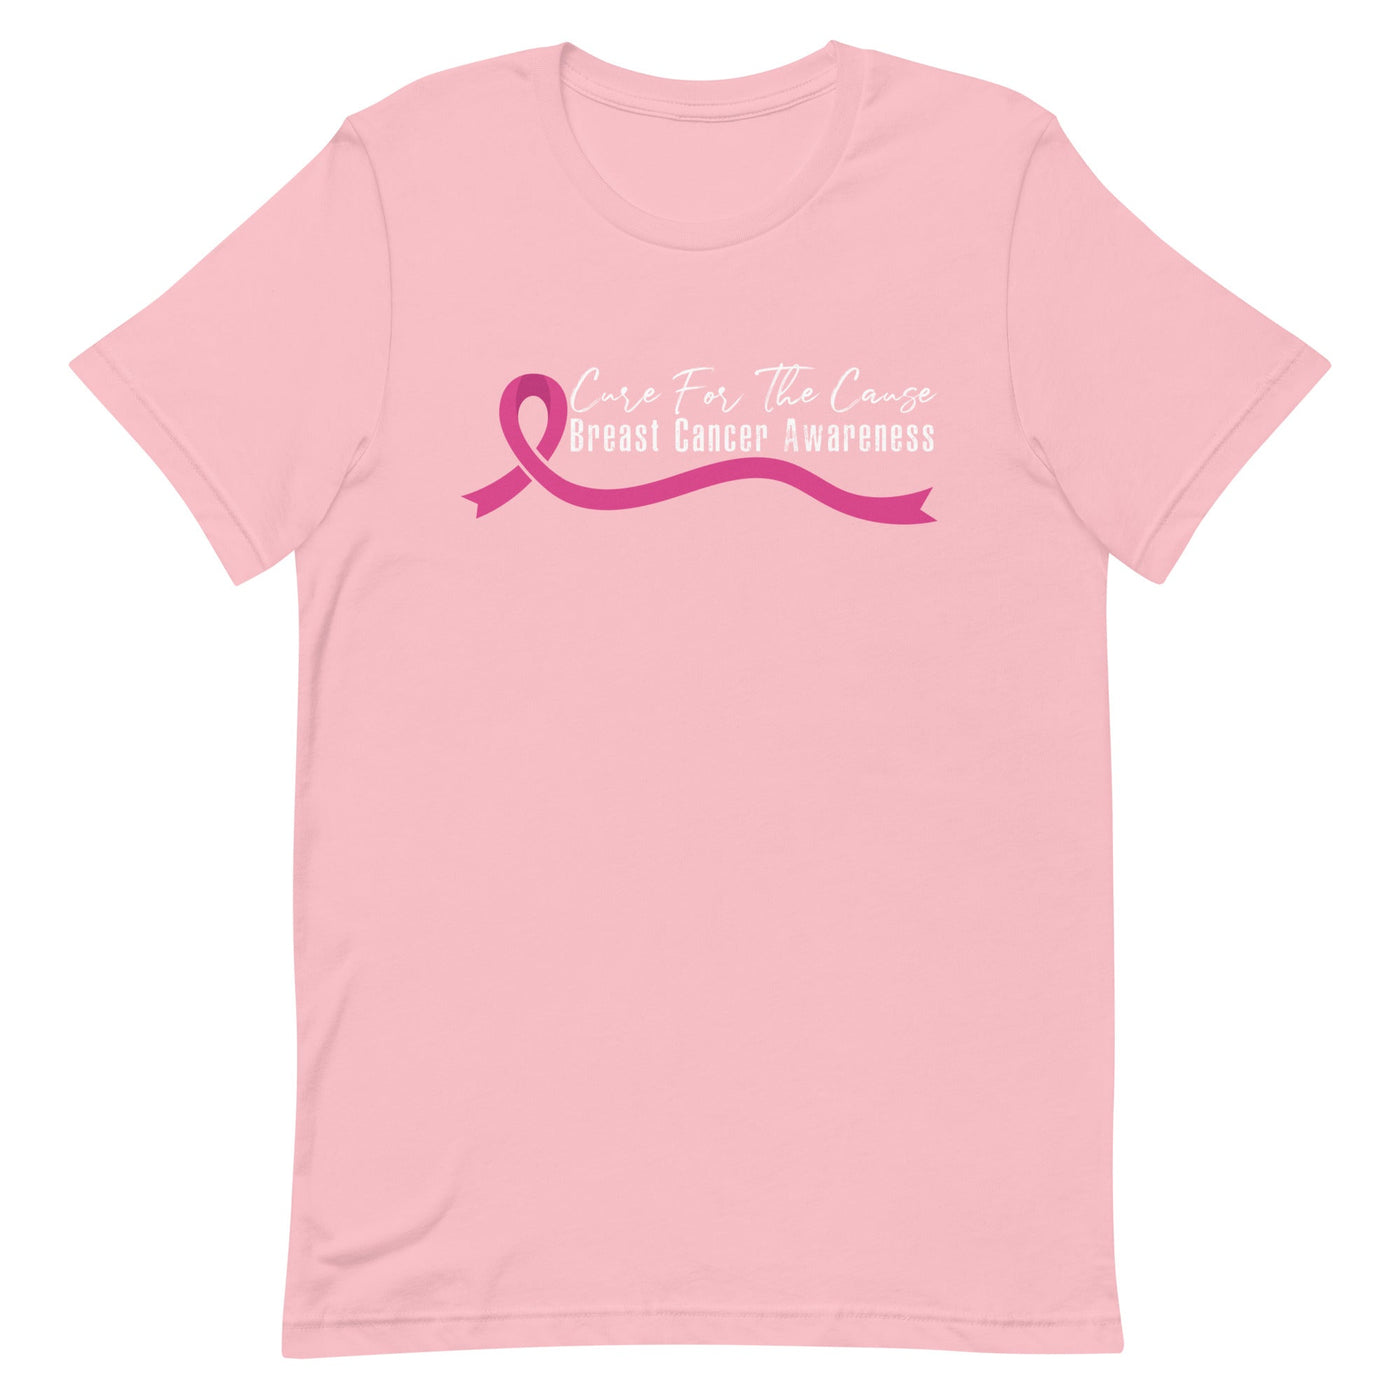 CARE FOR THE CAUSE BREAST CANCER AWARENESS WOMEN'S SHIRT - WHITE FONT Pink S 